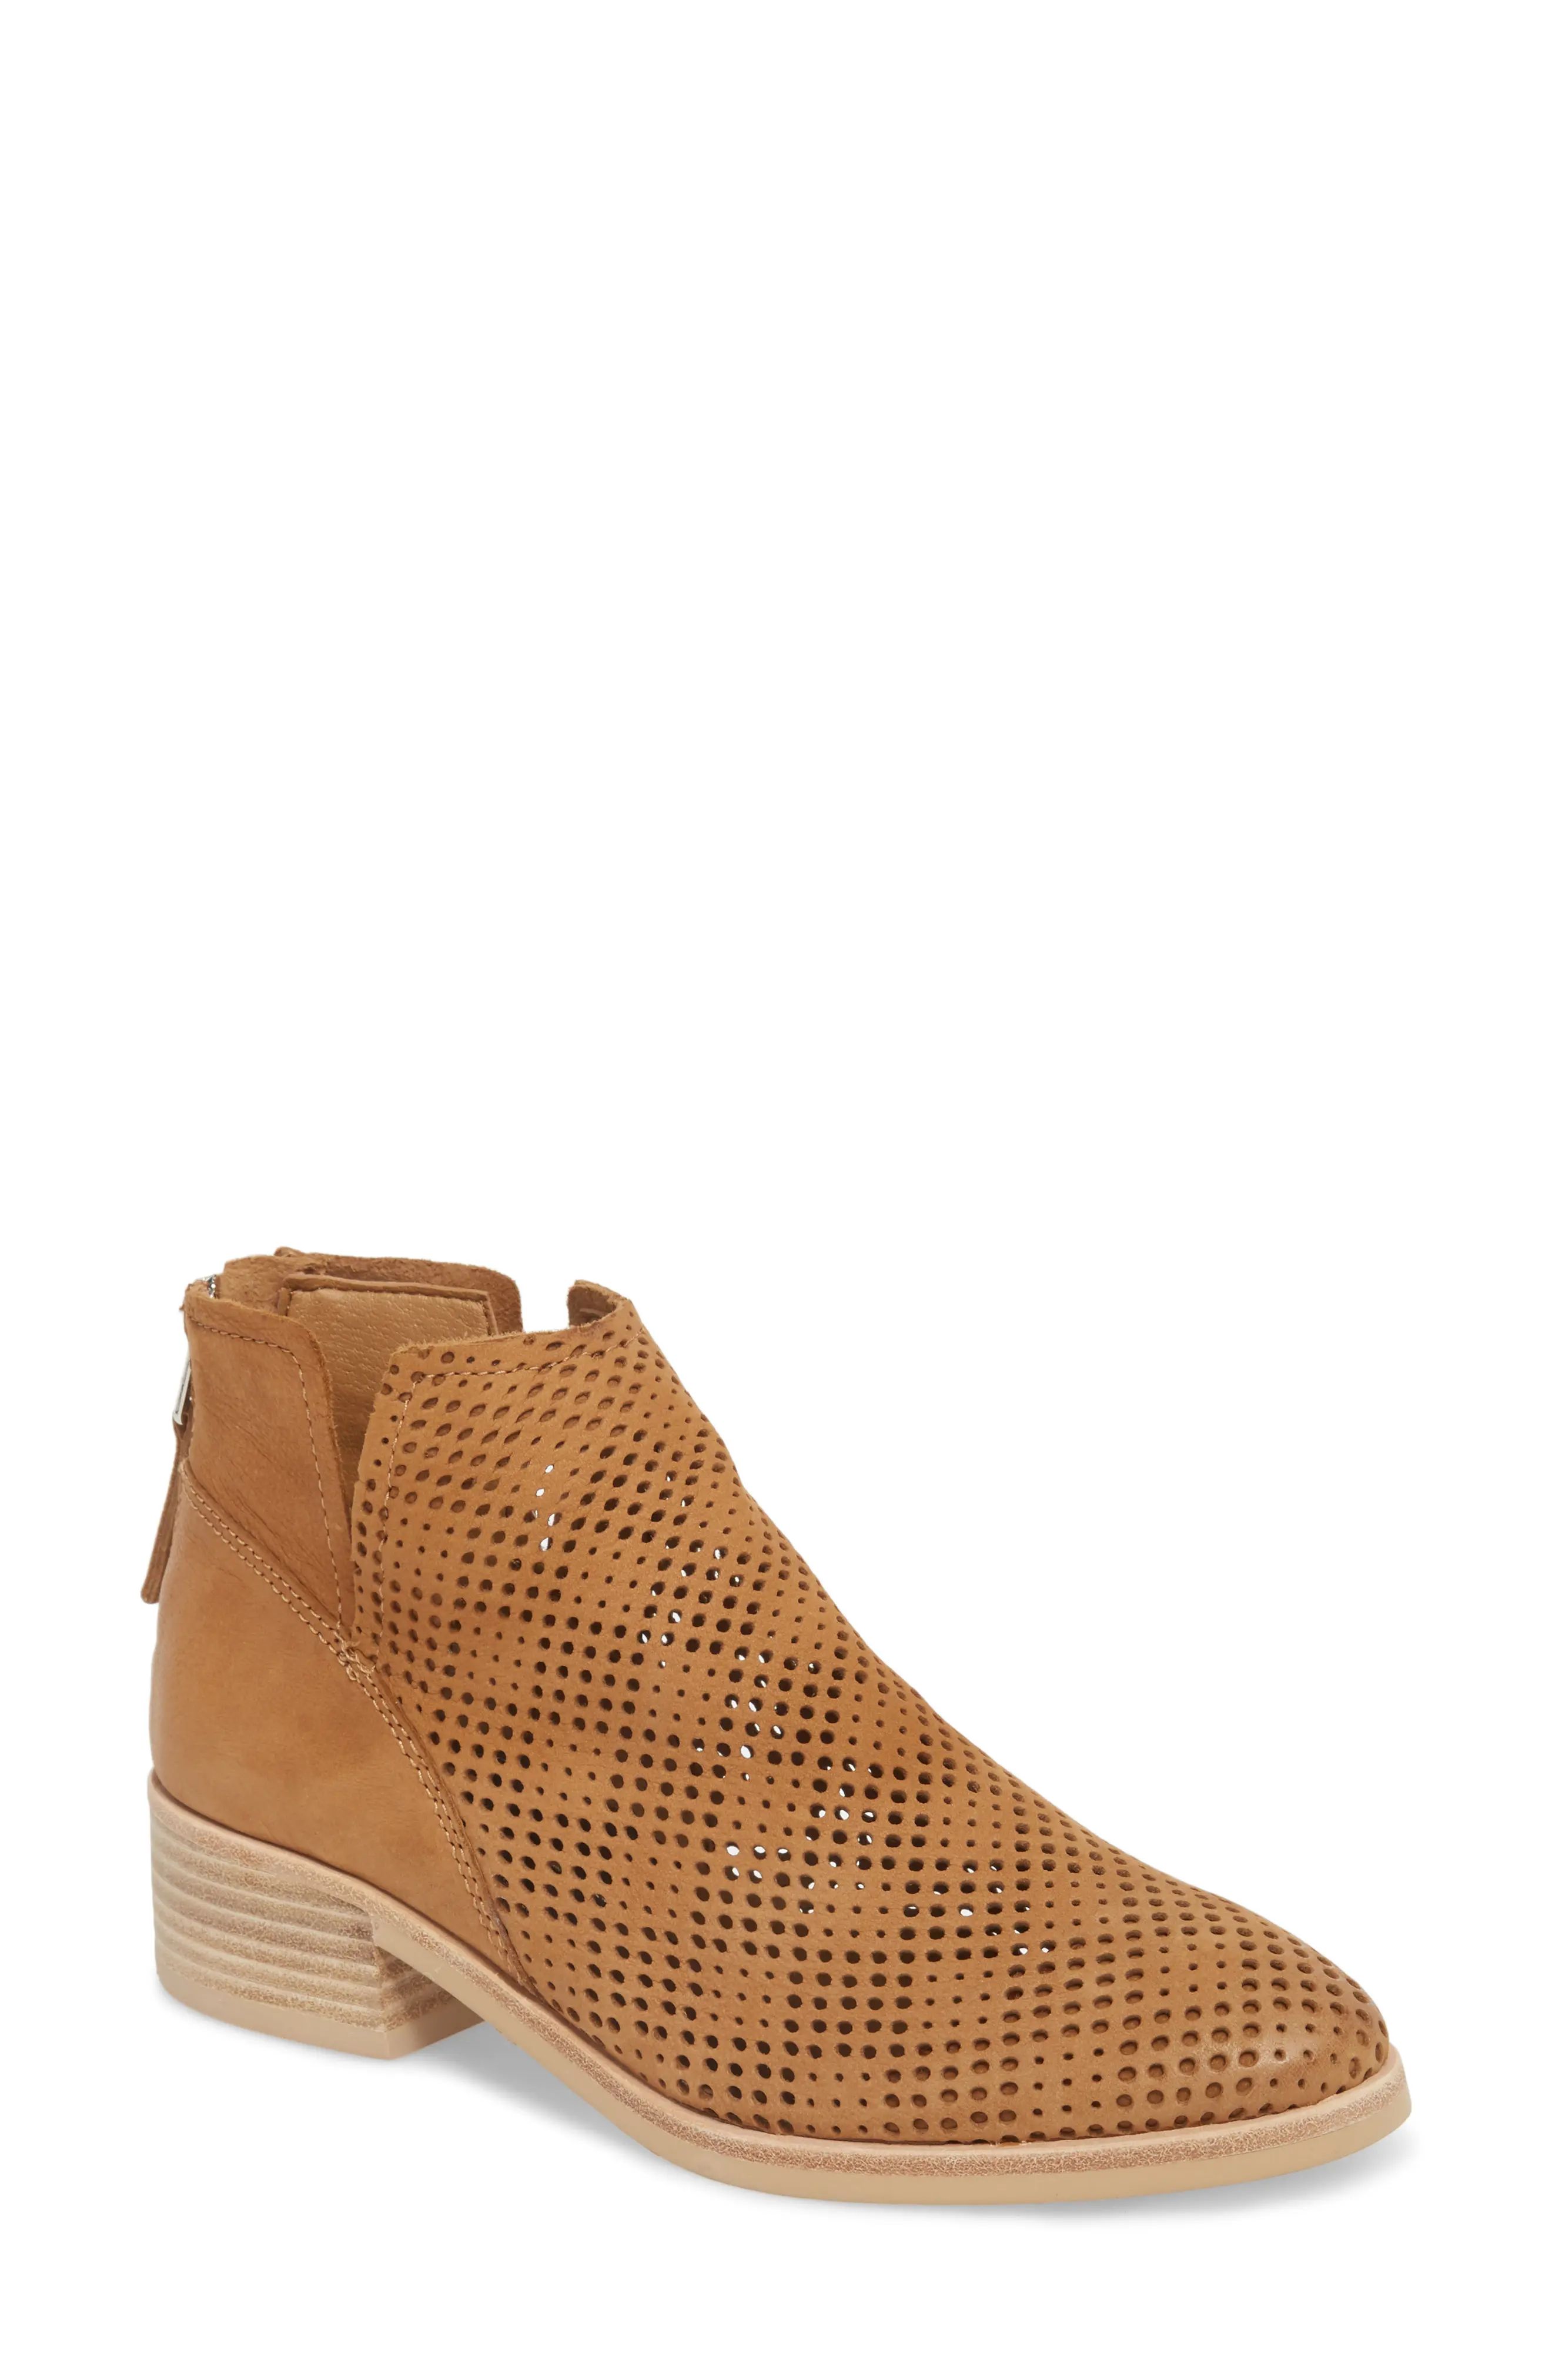 Dolce Vita Tommi Perforated Bootie (Women) | Nordstrom